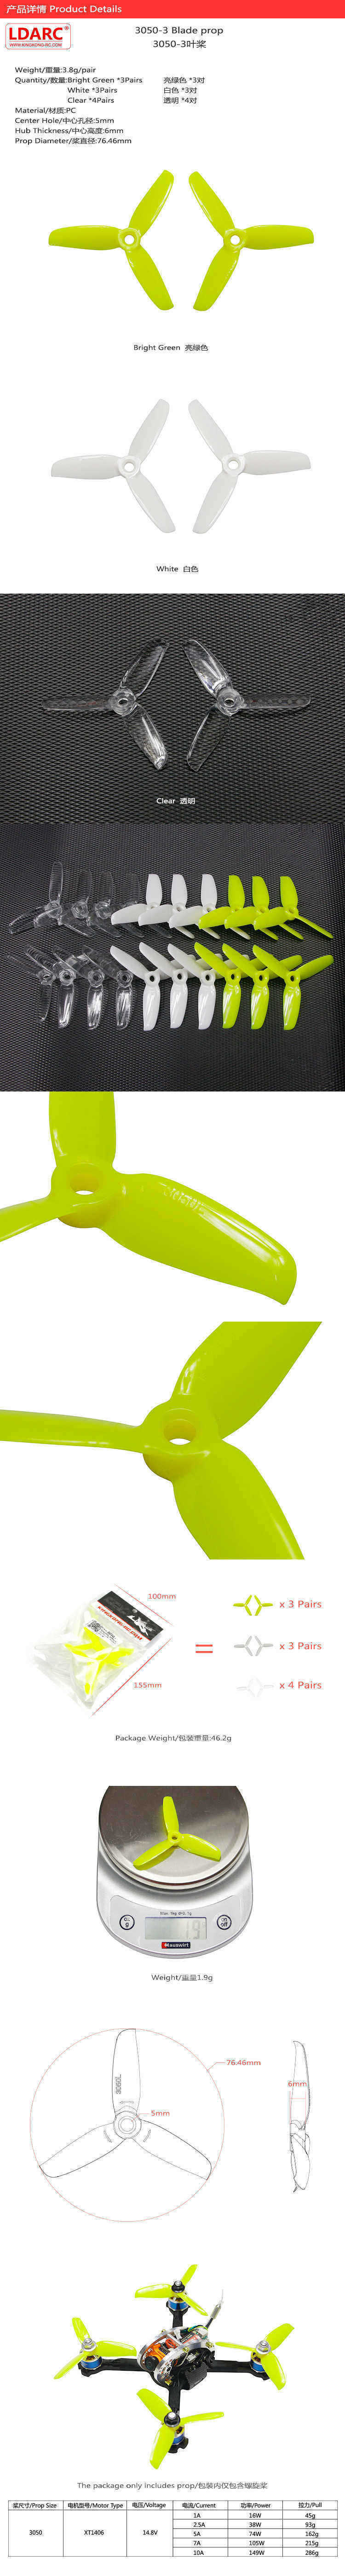 10-Pairs-LDARC--Kingkong-3050-3x5-3-Inch-PC-3-Blade-Propeller-with-5mm-Mounting-Hole-1243034